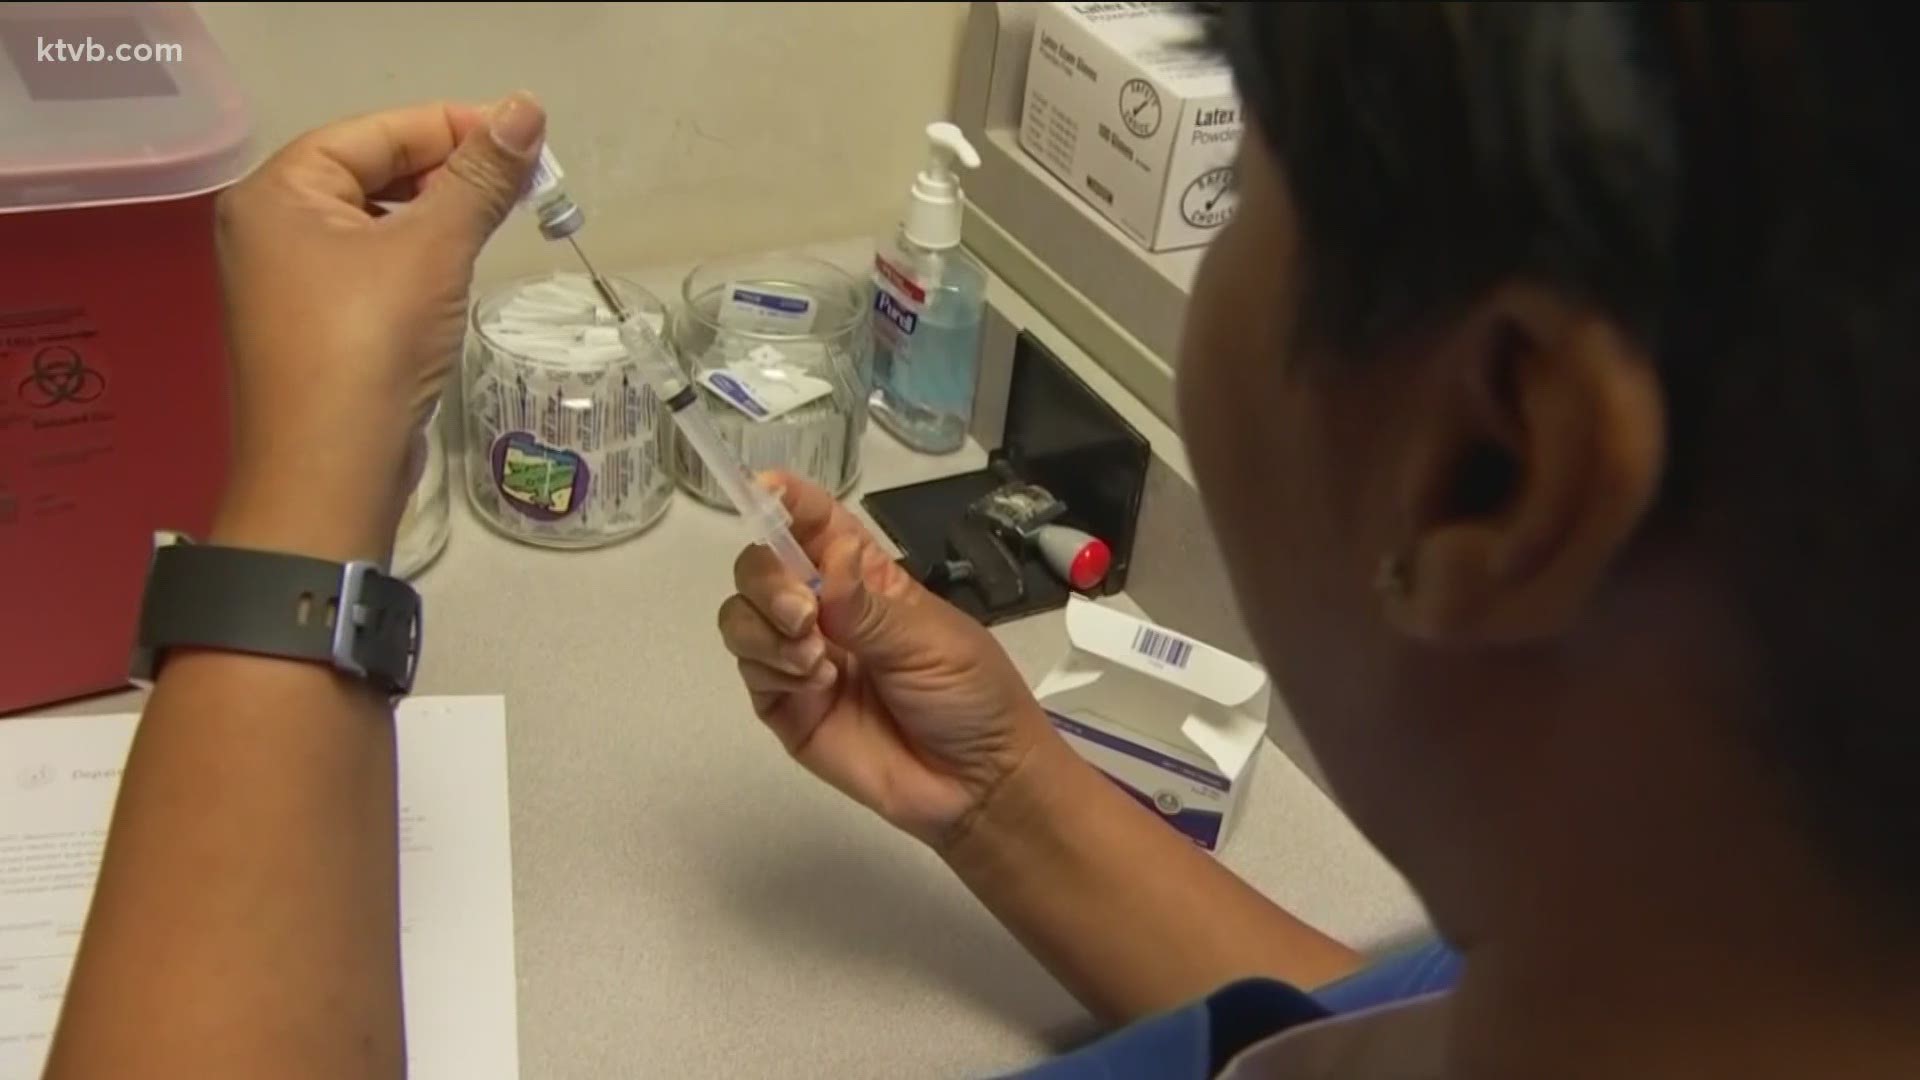 The CDC is preparing to have influenza vaccinations readily available for 194 to 198 million Americans, about 30 million more than the 2019-2020 flu season.